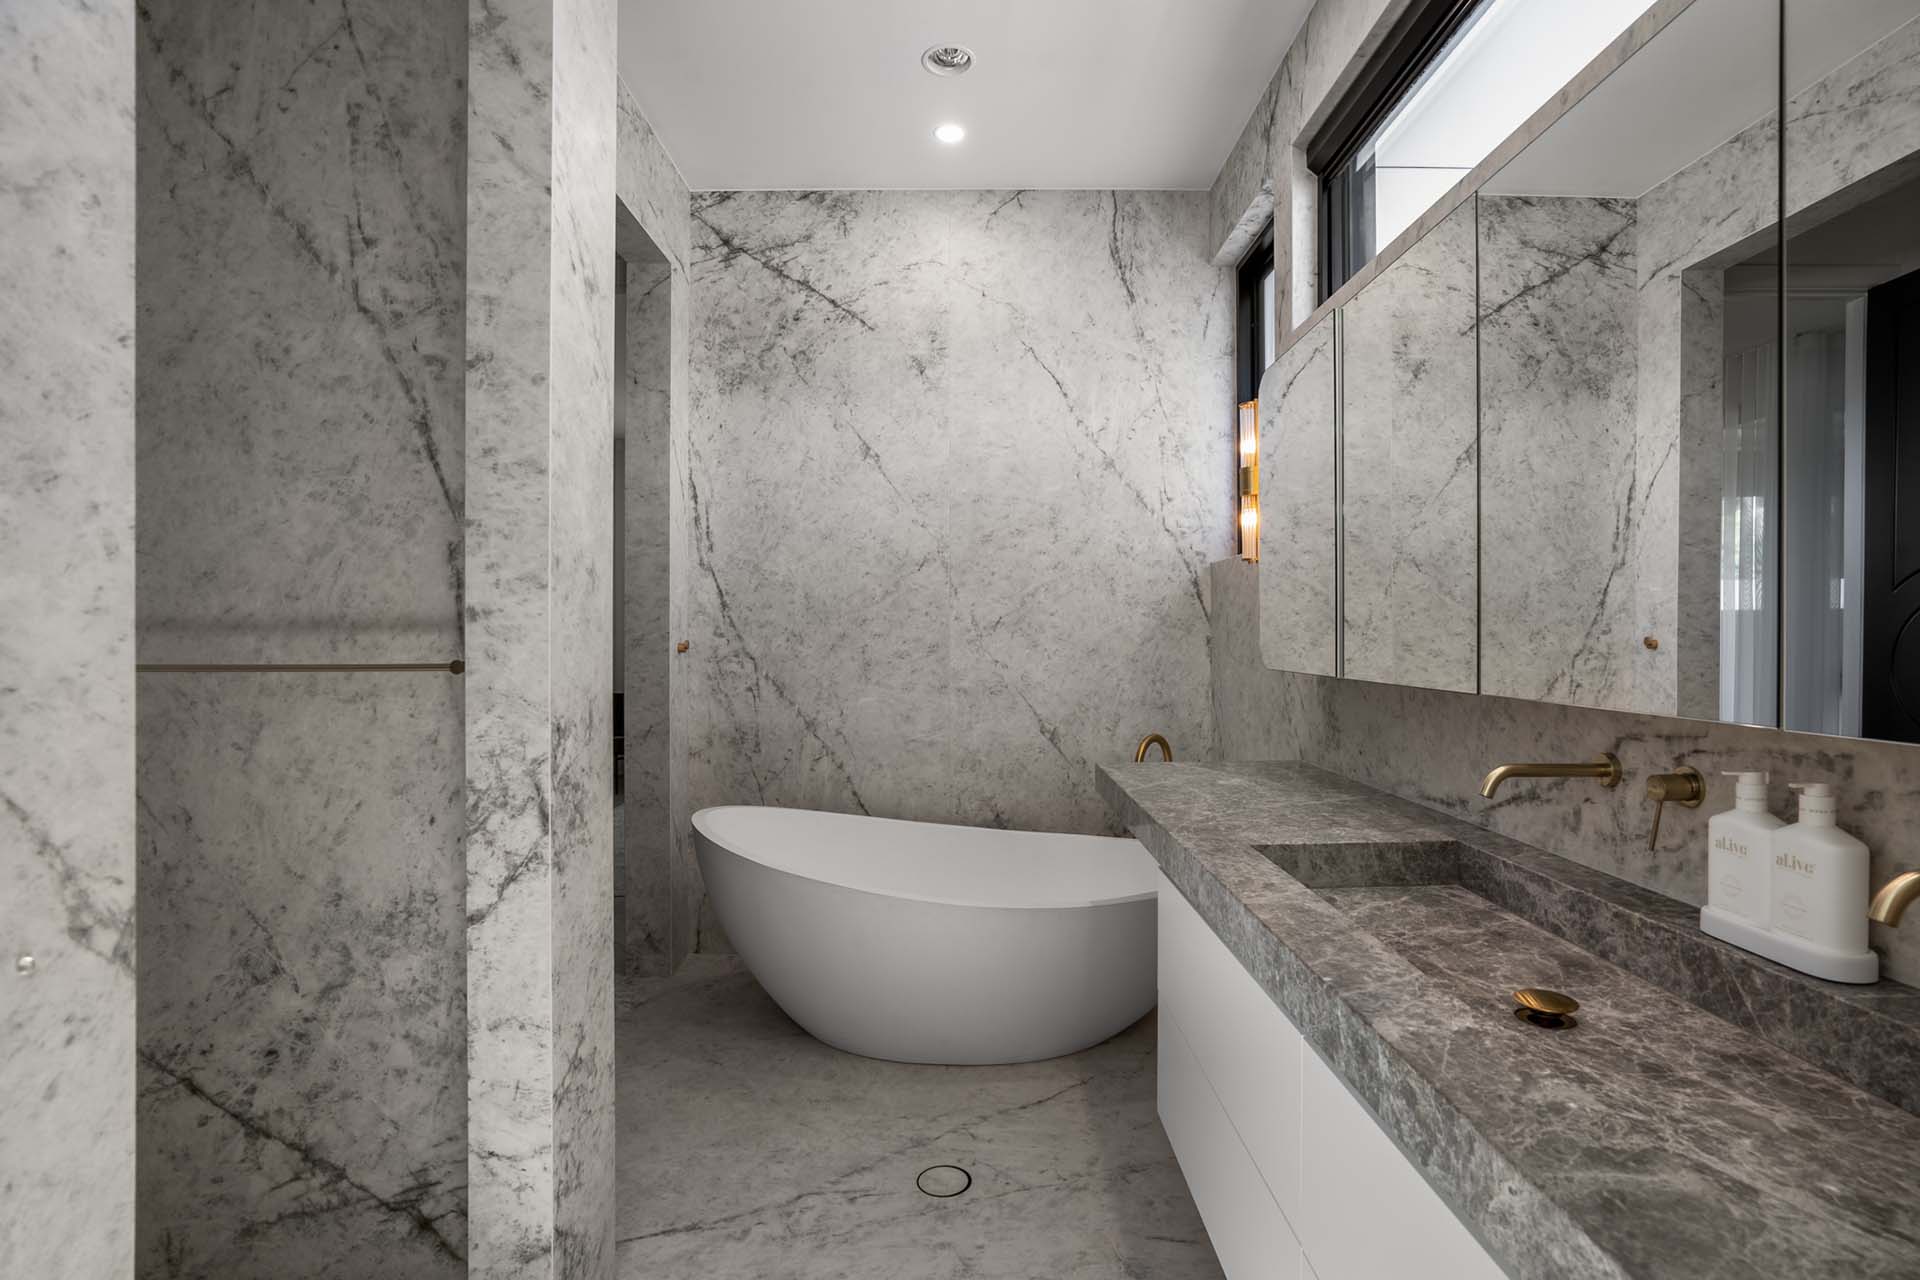 Marble bathroom design with Lorde White marble wall cladding, integrated stone basin, and bathtub. Gold tap ware